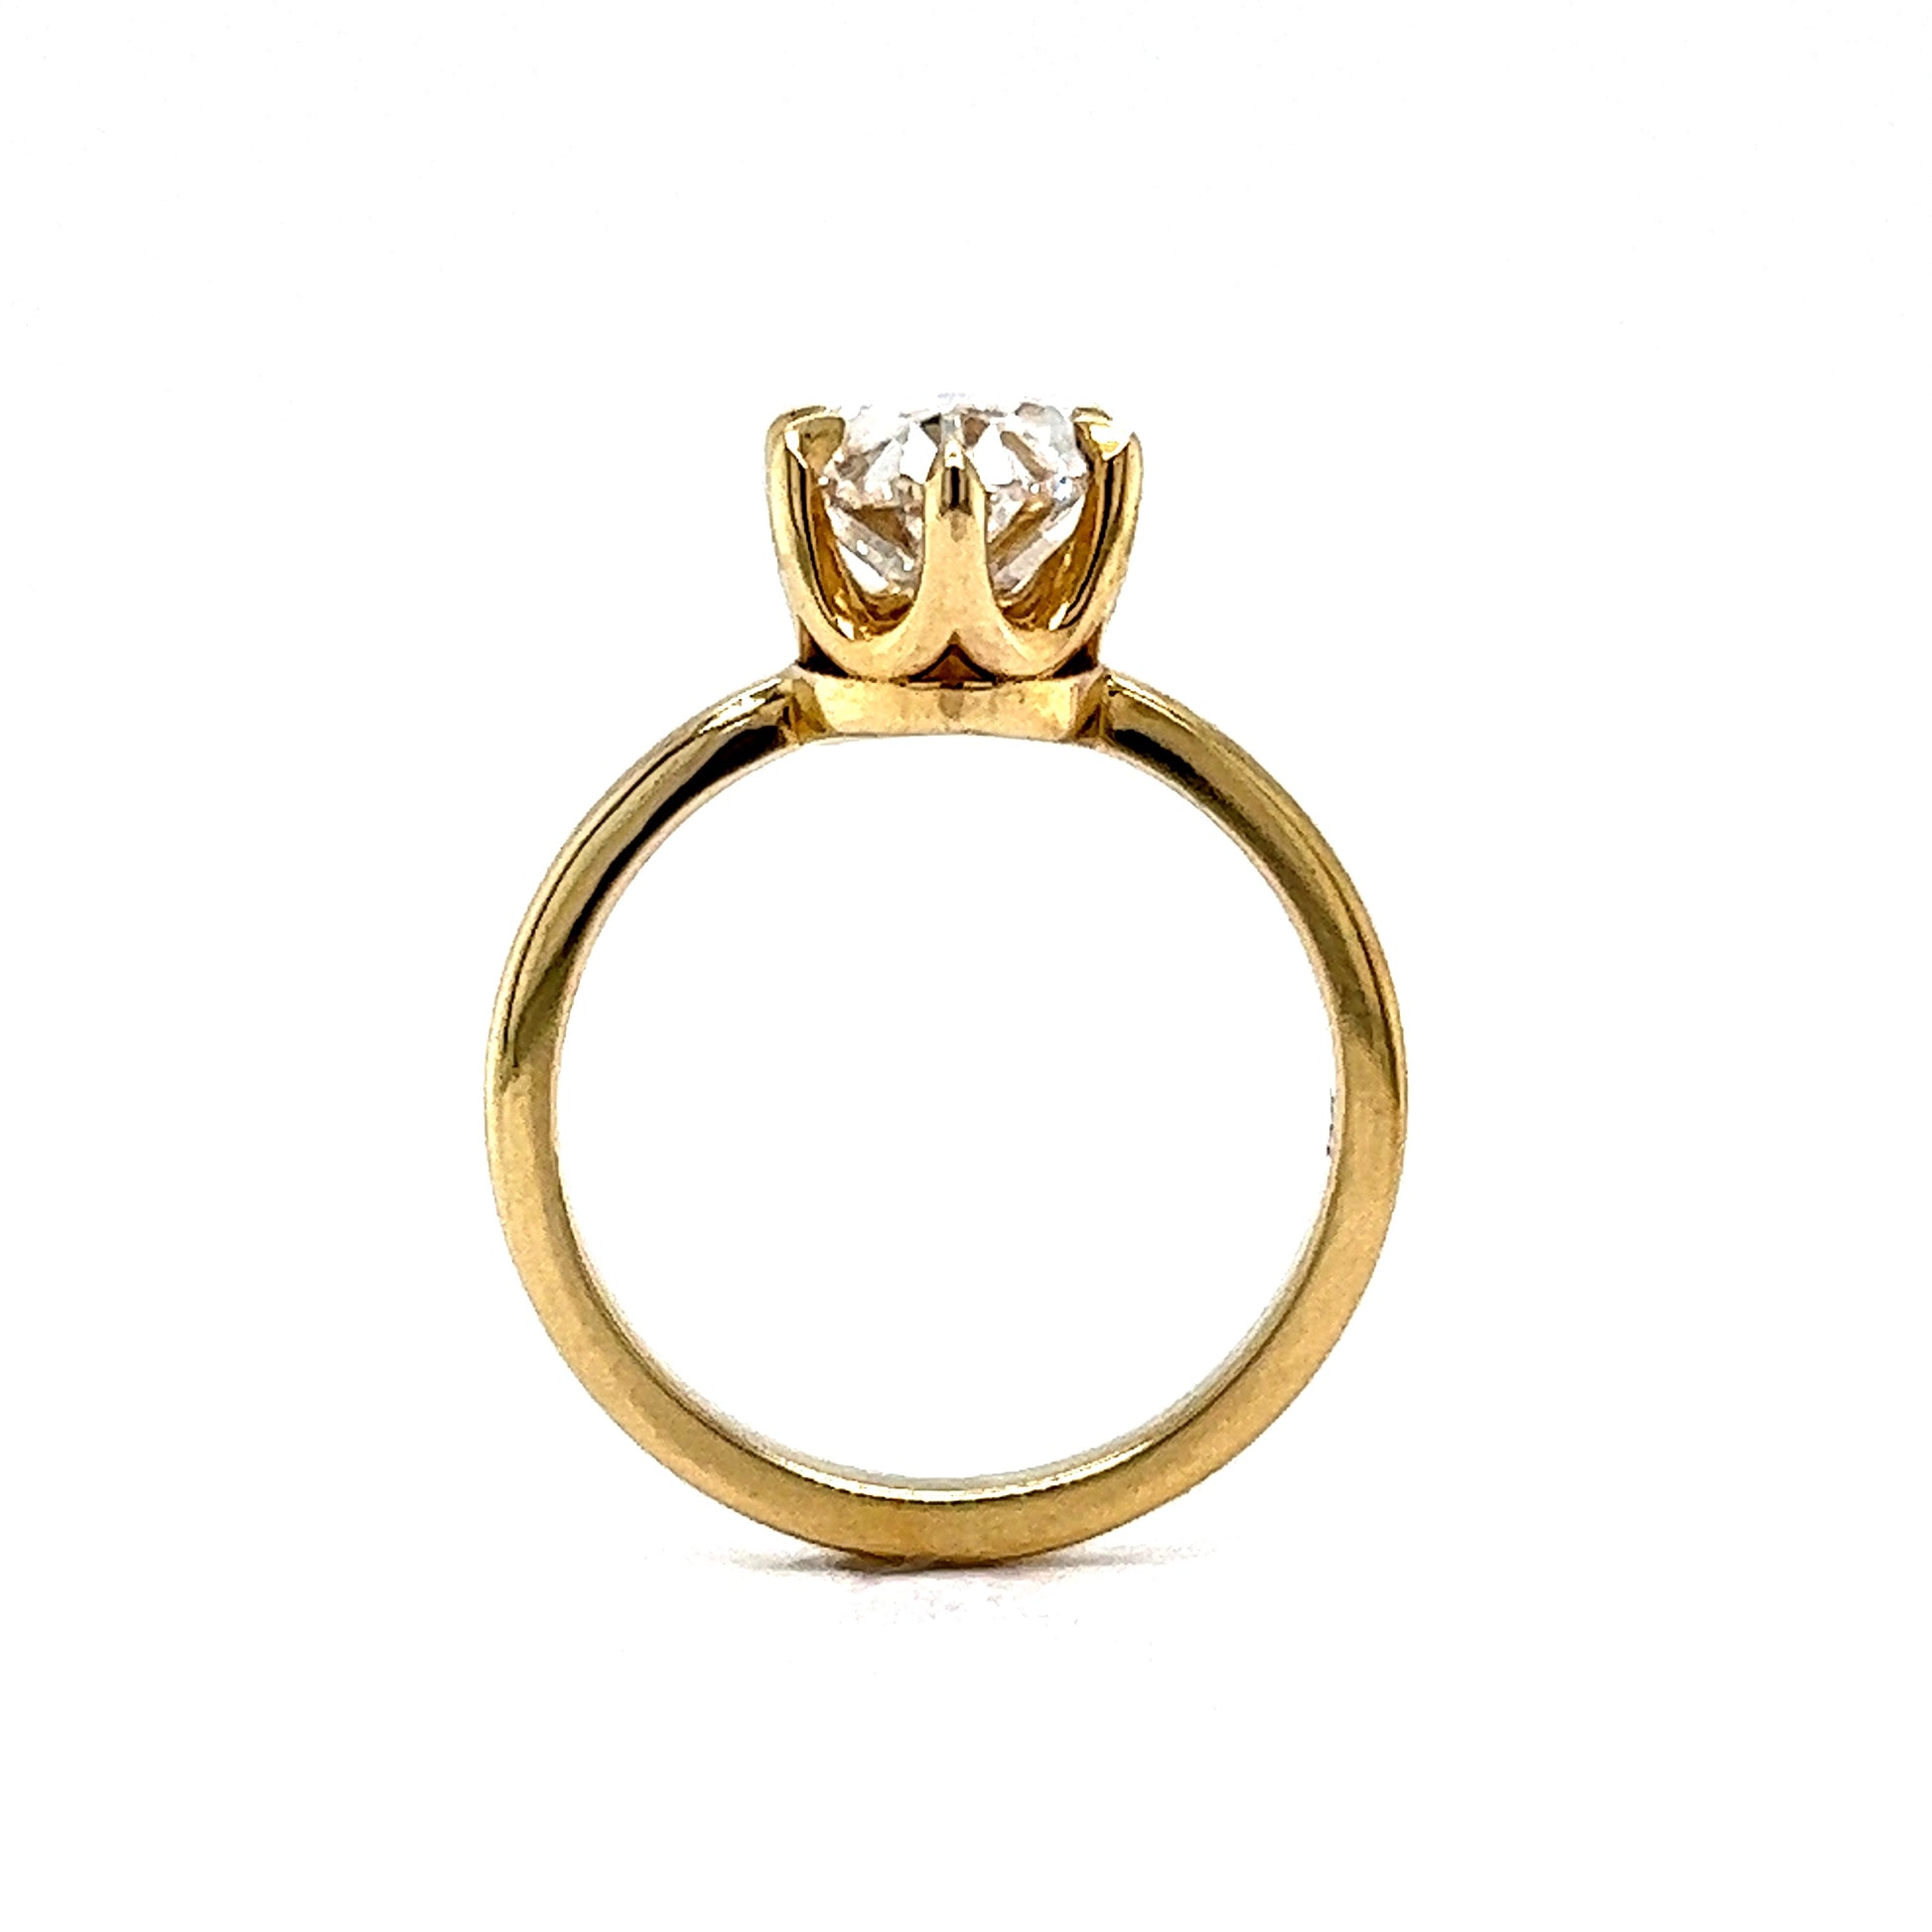 3.04 Oval Cut Diamond Engagement Ring in 14k Yellow GoldComposition: 14 Karat Yellow Gold Ring Size: 6.25 Total Diamond Weight: 3.04ct Total Gram Weight: 3.8 g Inscription: 14k
      